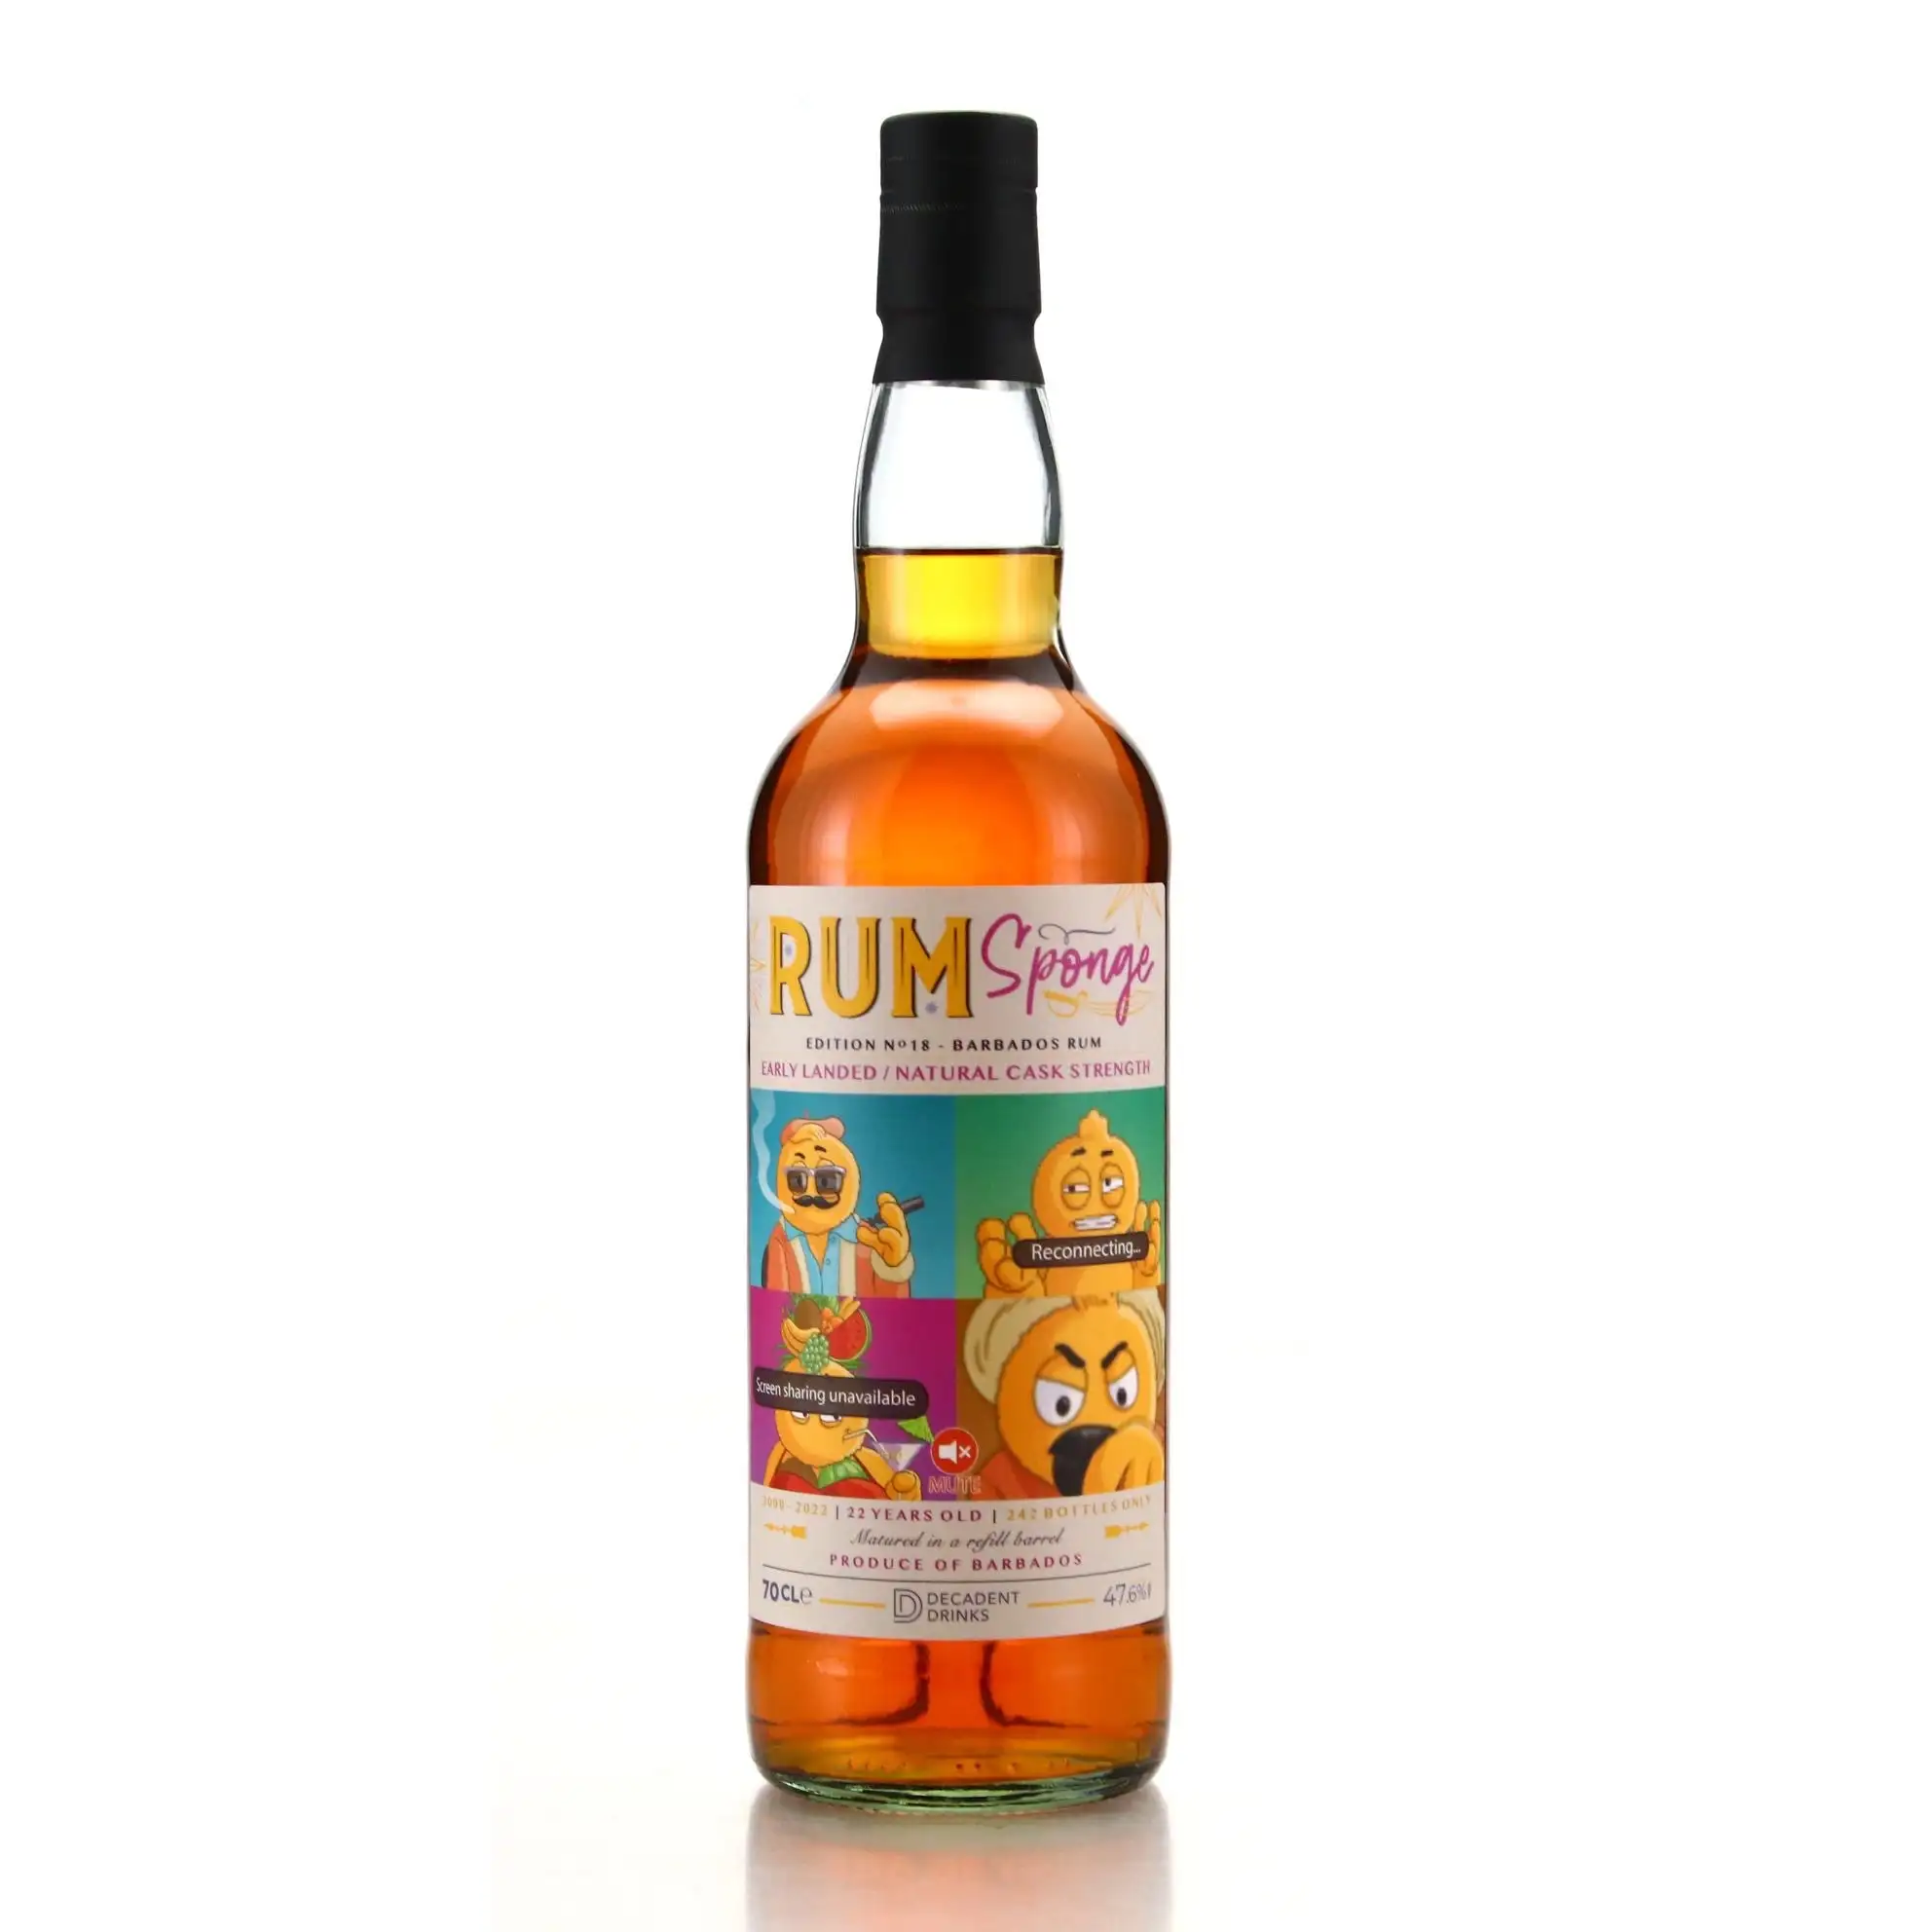 Image of the front of the bottle of the rum Rum Sponge No. 18